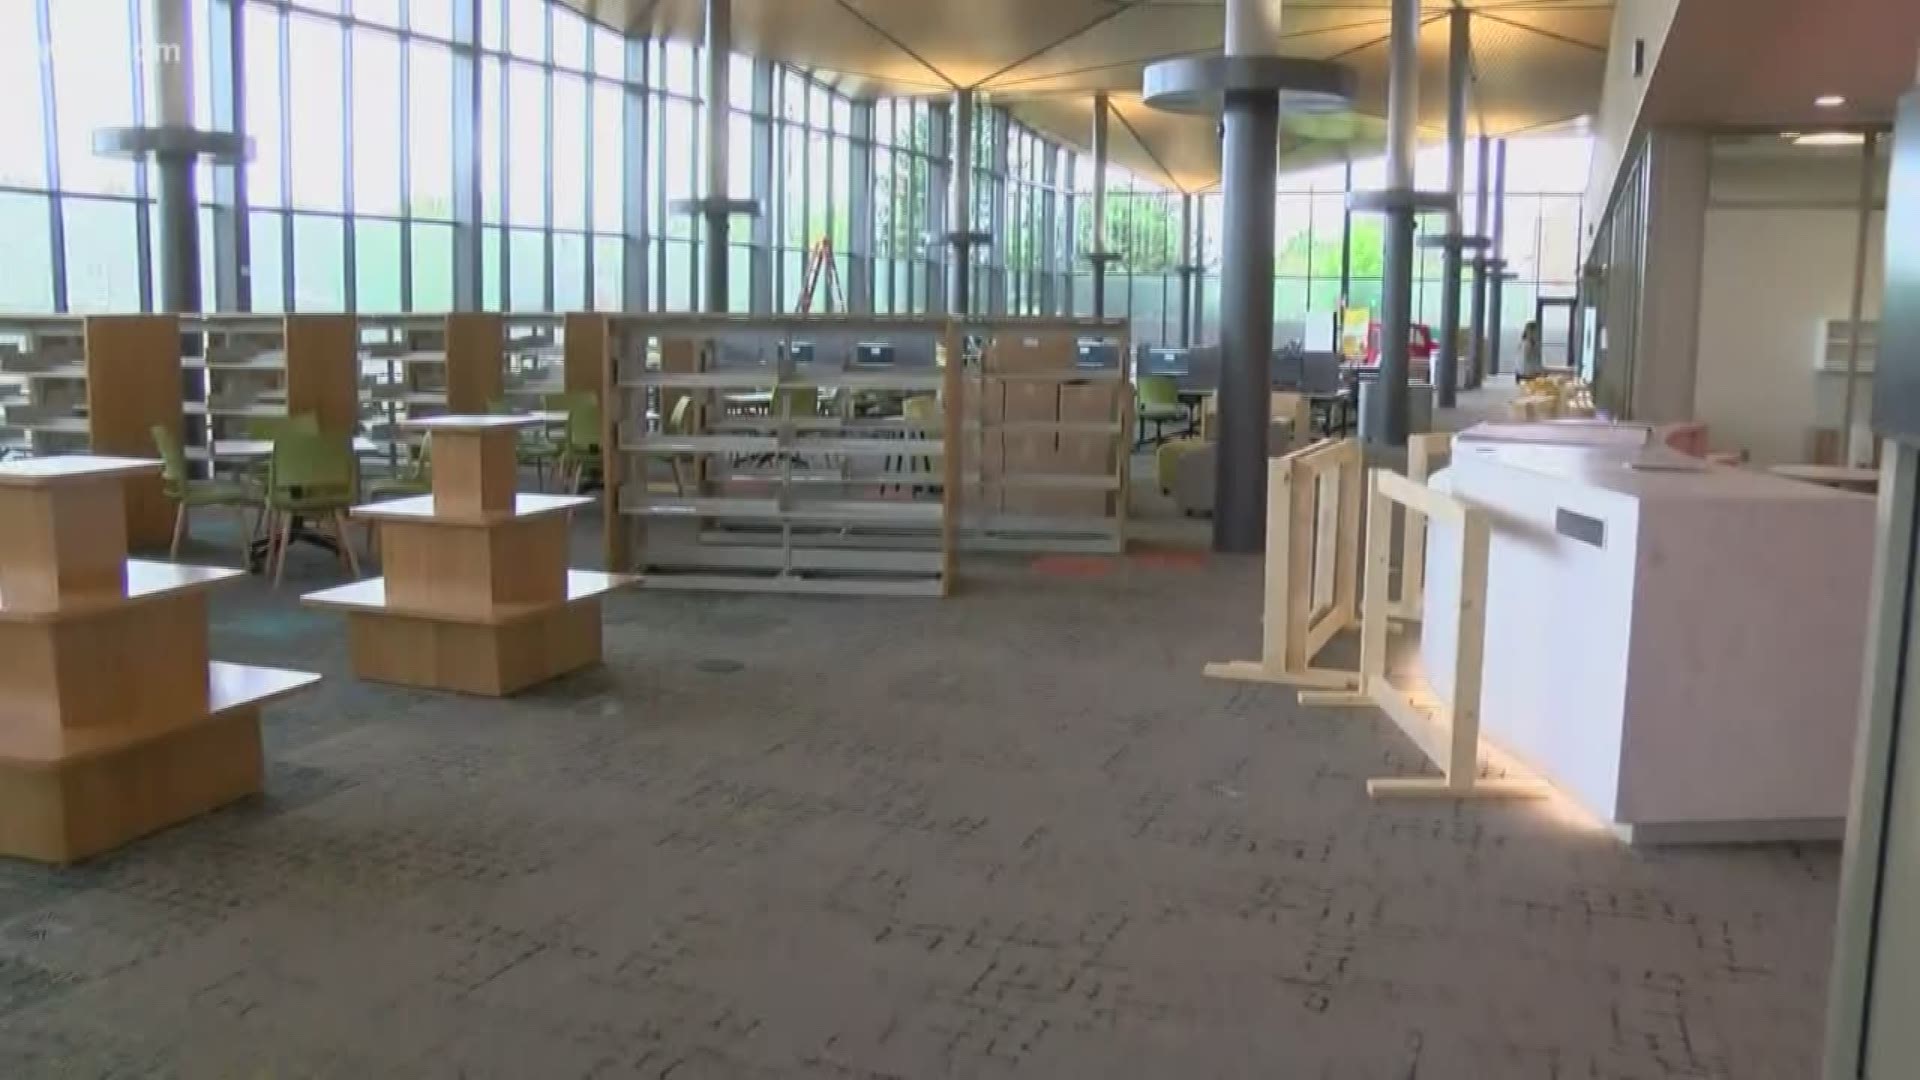 The new library opens June 7 and features a cafe area, media space, book-reserve lockers and more